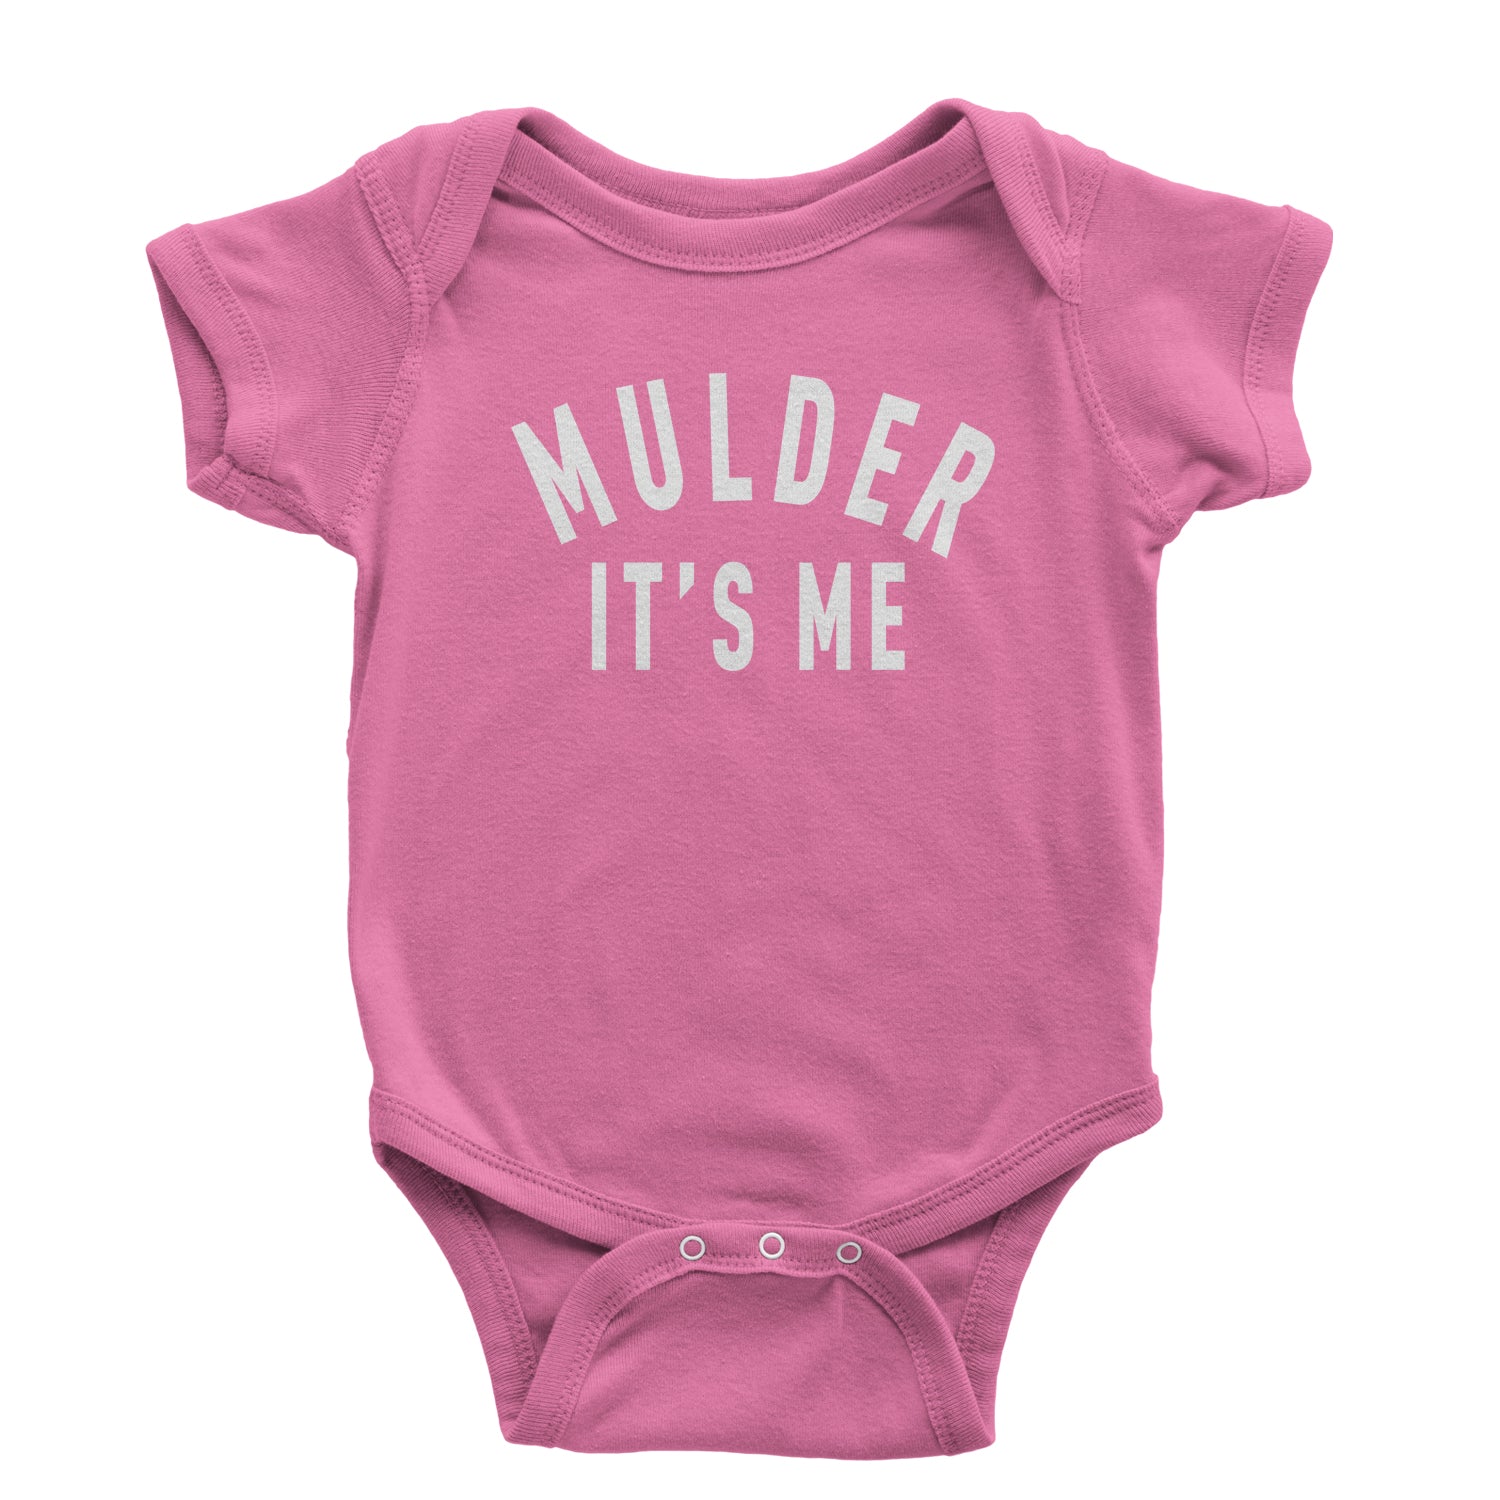 Mulder, It's Me Infant One-Piece Romper Bodysuit 51, area, believe, files, is, mulder, out, scully, the, there, truth, x, xfiles by Expression Tees